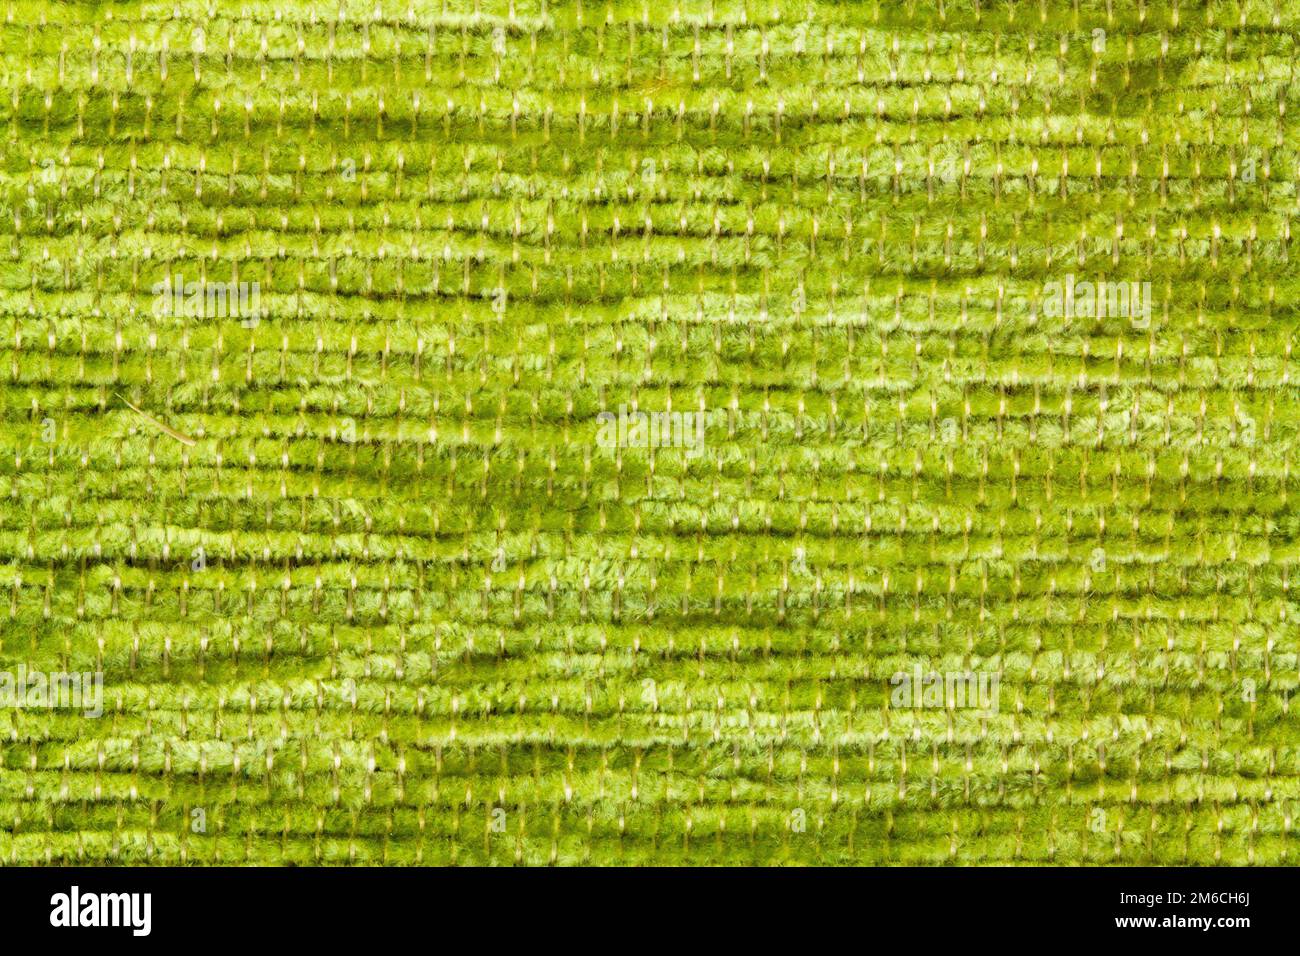 Texture of green synthetic fabric Stock Photo